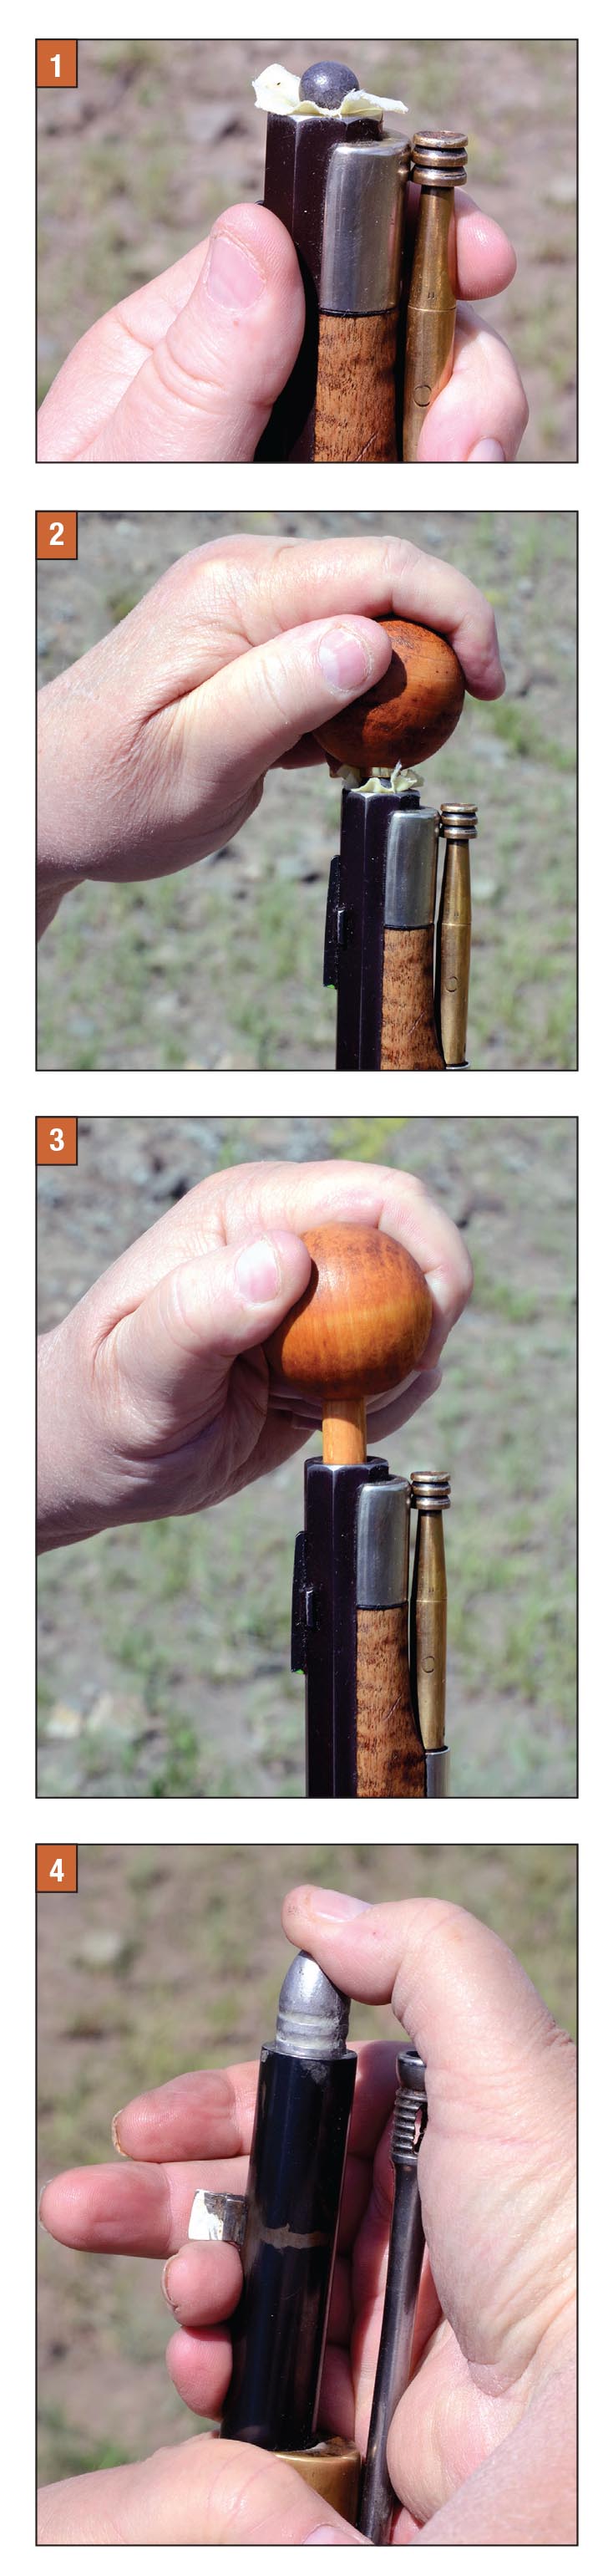 (1) The first step after charging the Kentucky long rifle is to set a patch over the muzzle with a roundball centered on it. (2) The second step is to push the patched roundball into muzzle with a bullet seater. A ball starter with brass stud helps get it started. (3) After the roundball is started it can be pushed farther in with the seater’s 6-inch rod. (4) In comparison, loading the Parker- Hale Model 1853 rifle-musket is simple. After the powder charge is dumped into the barrel, the Minié ball can be started by pushing it into the muzzle with thumb pressure.